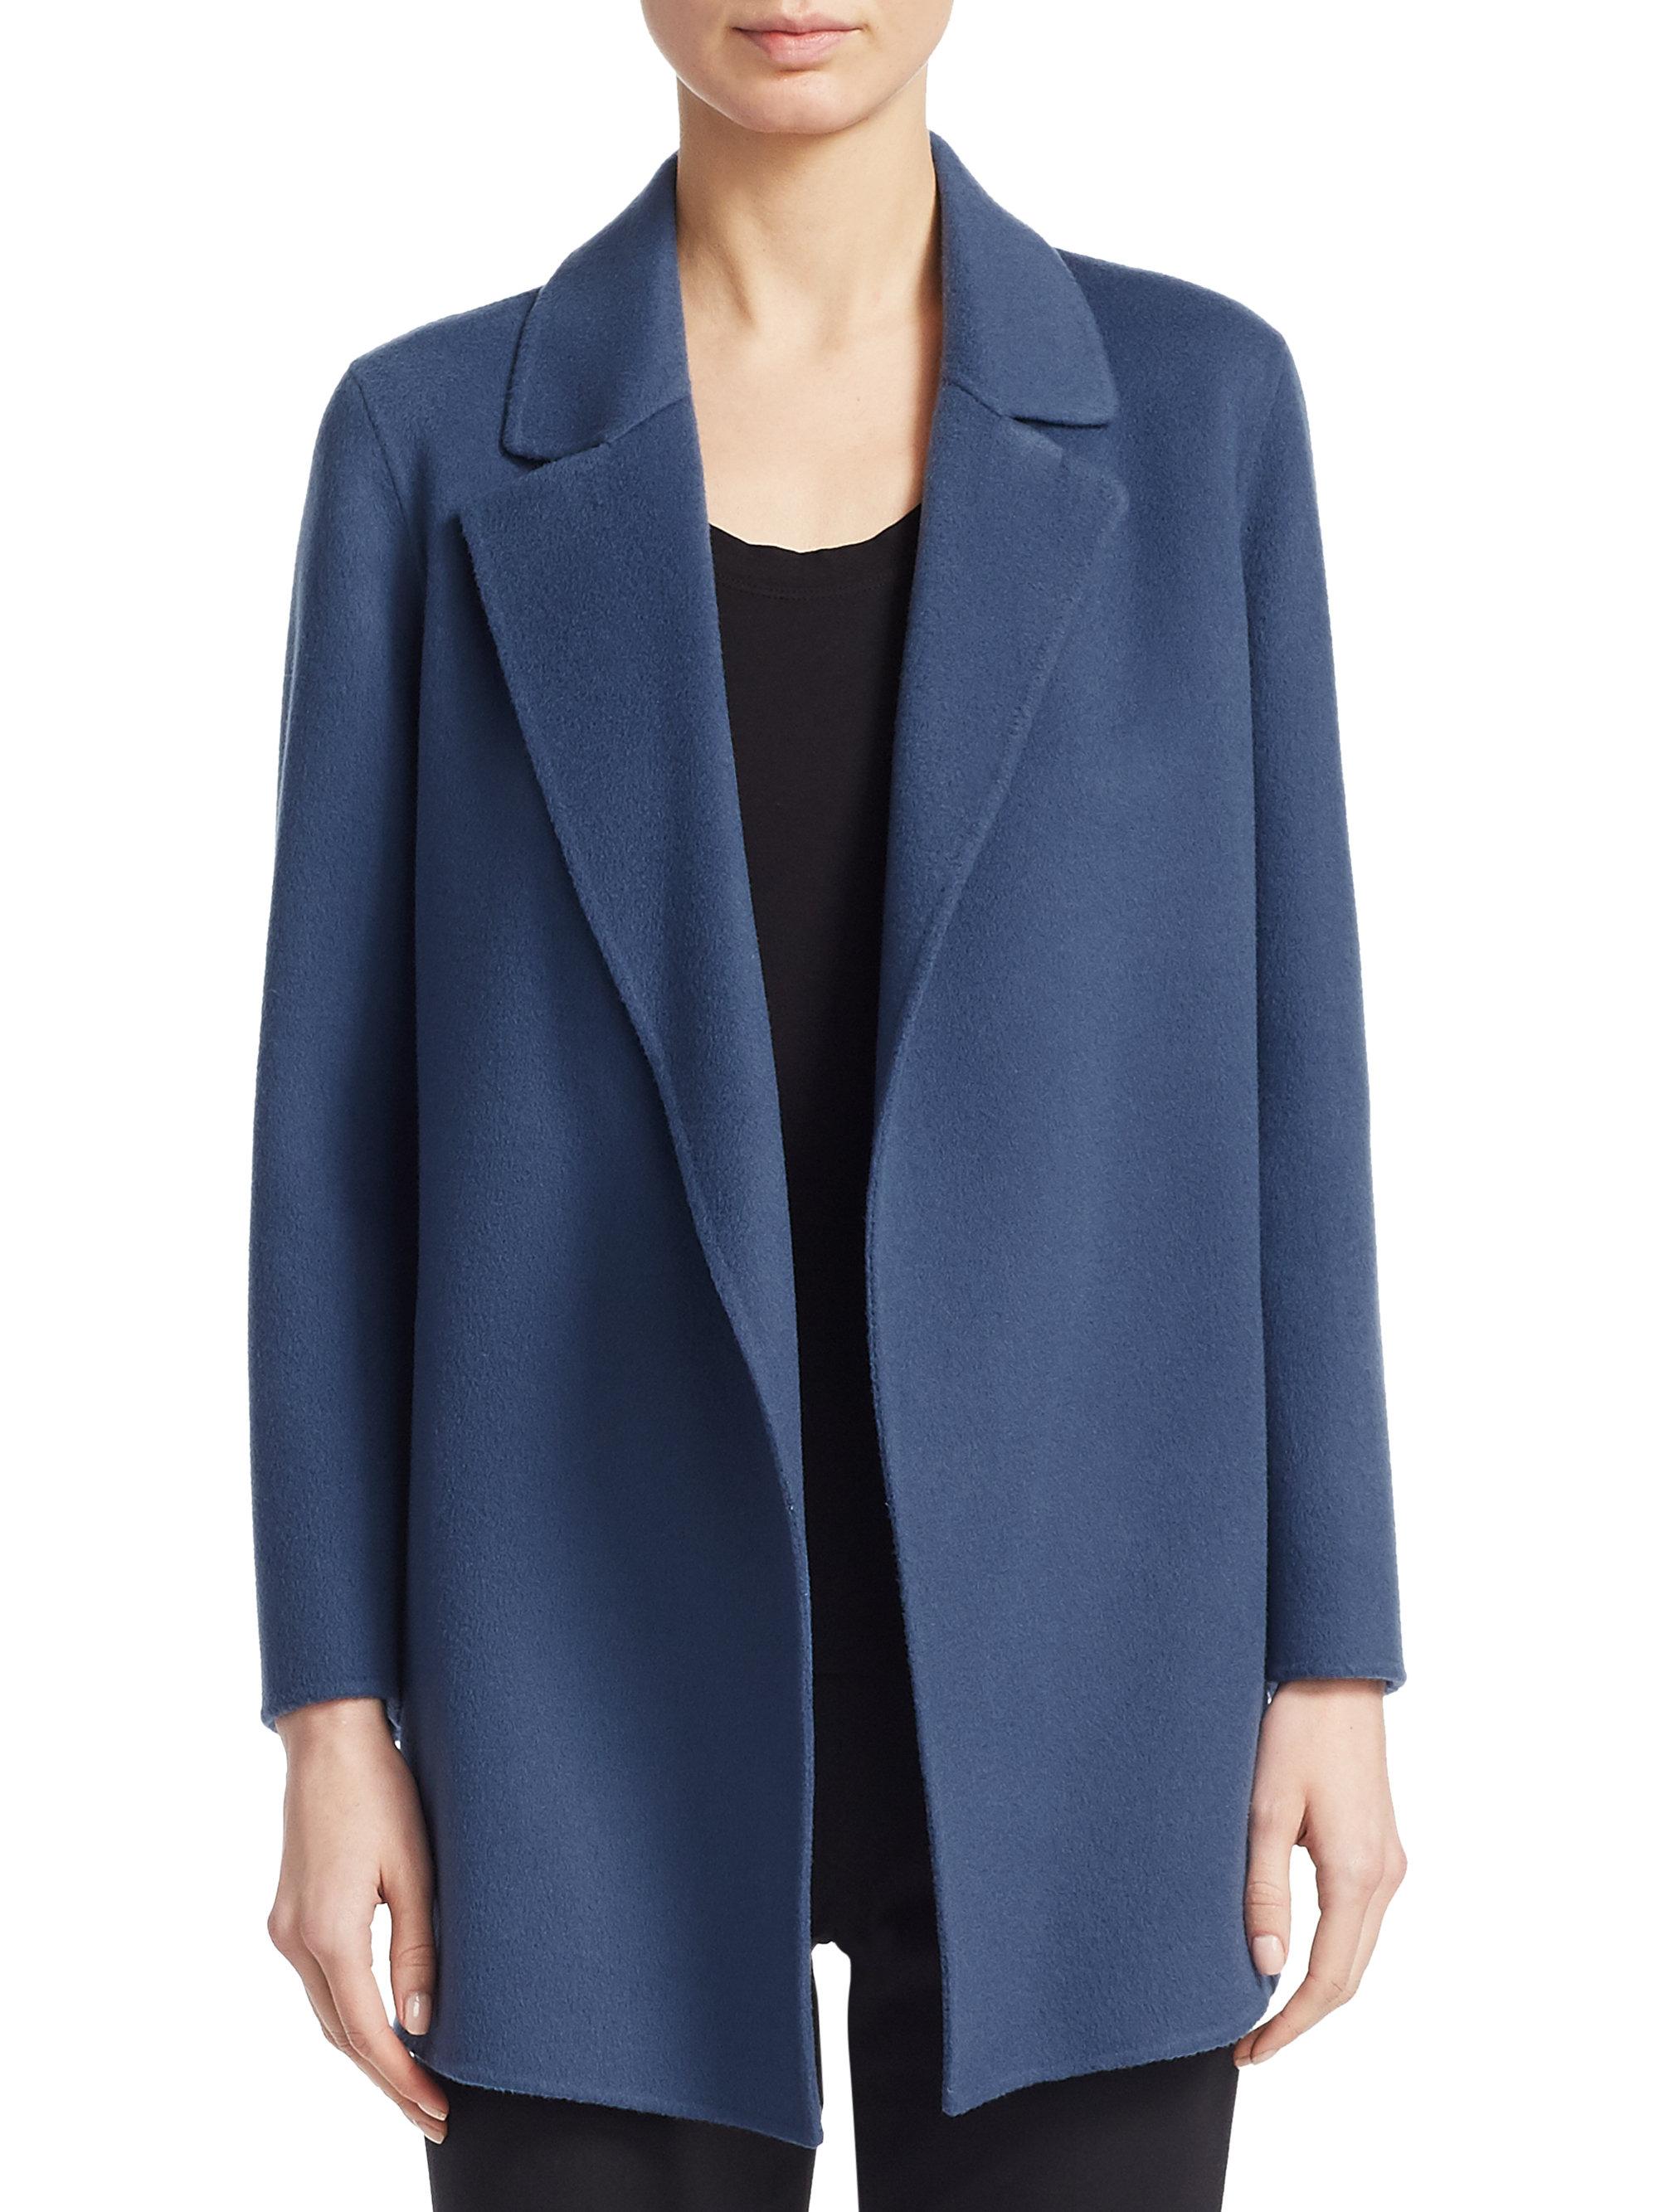 Theory Wool Clairene Jacket in Blue - Lyst